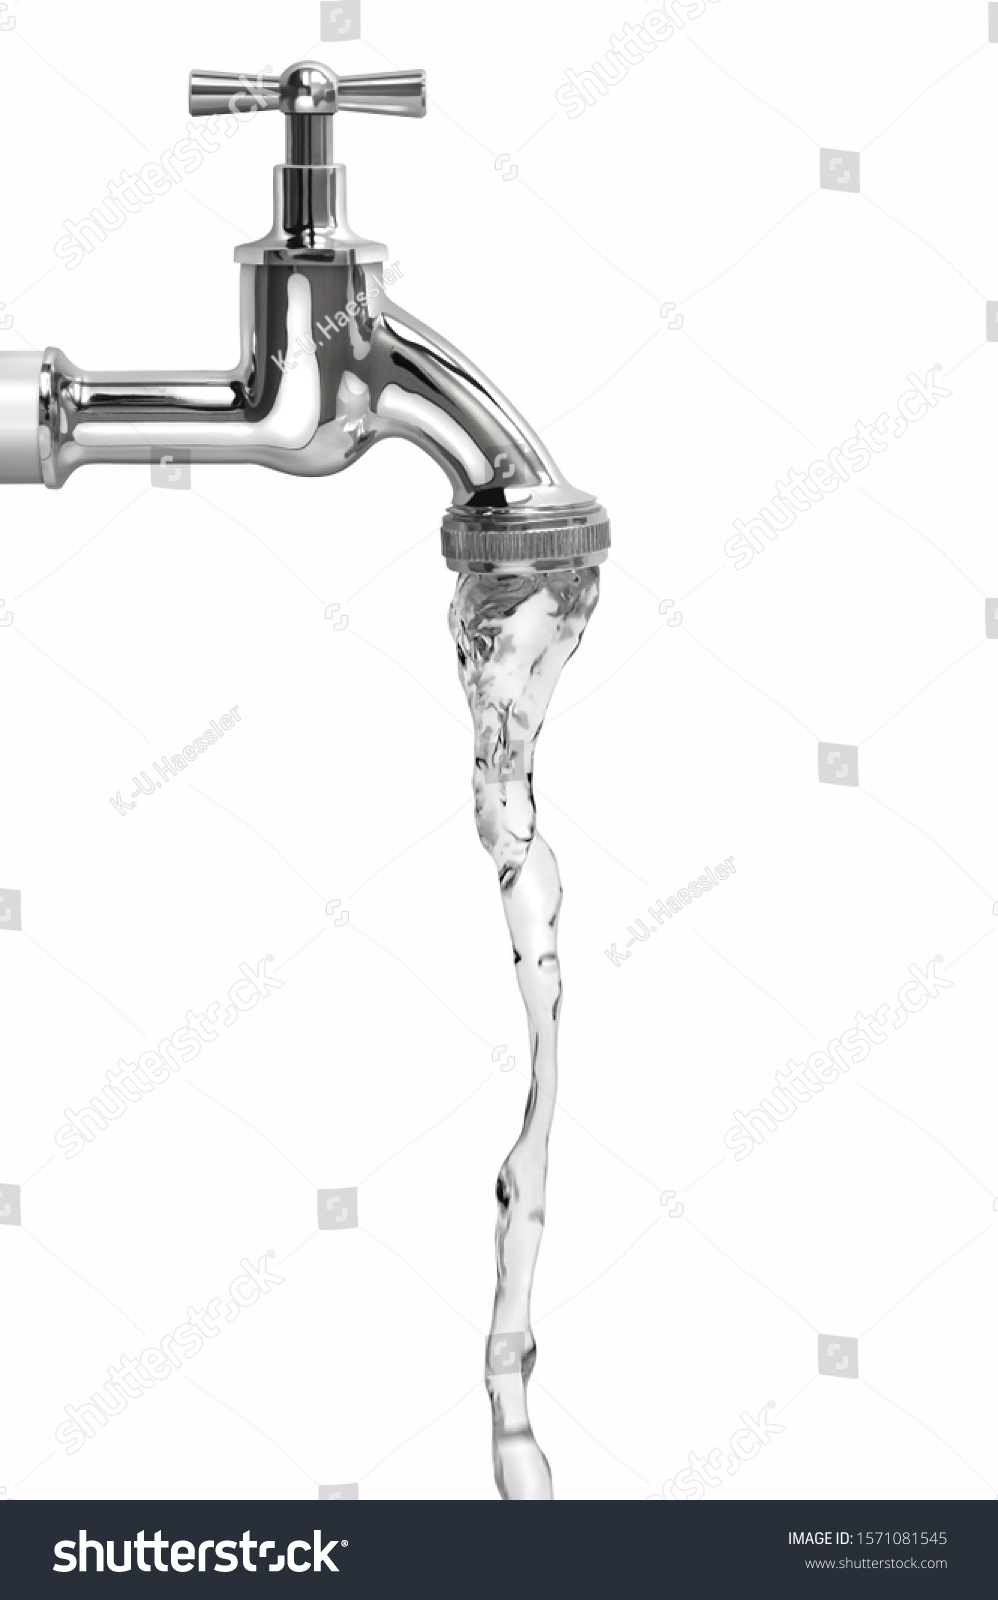 Running water from the tap #1571081545